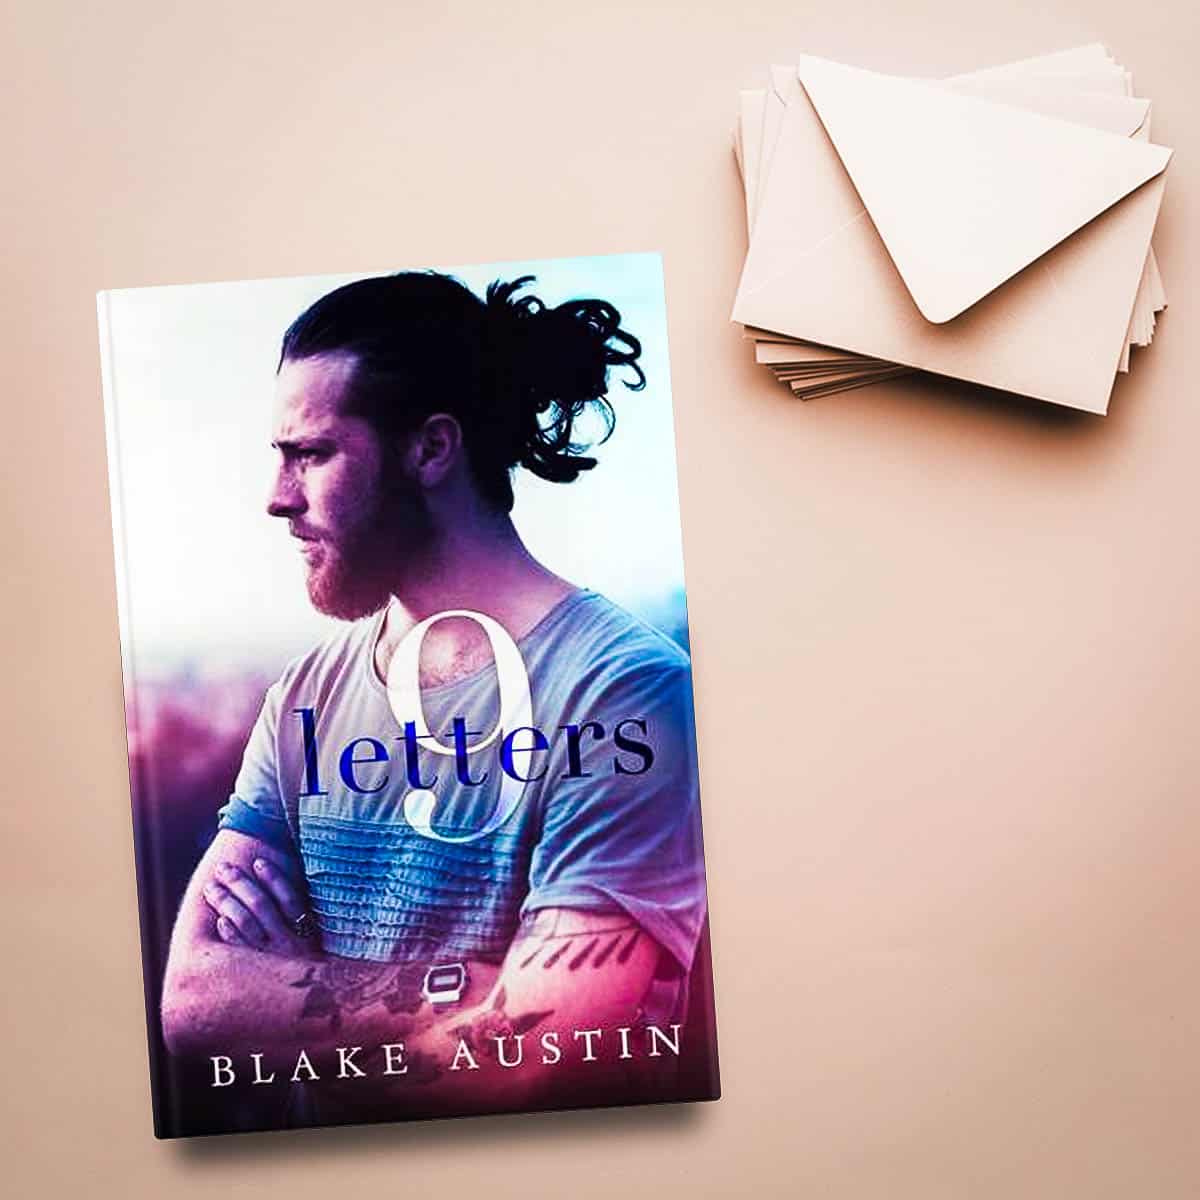 9 Letters by Blake Austin is a poignant look into the life of a man grieving the loss of the love of his life, but moving on with the help of her letters